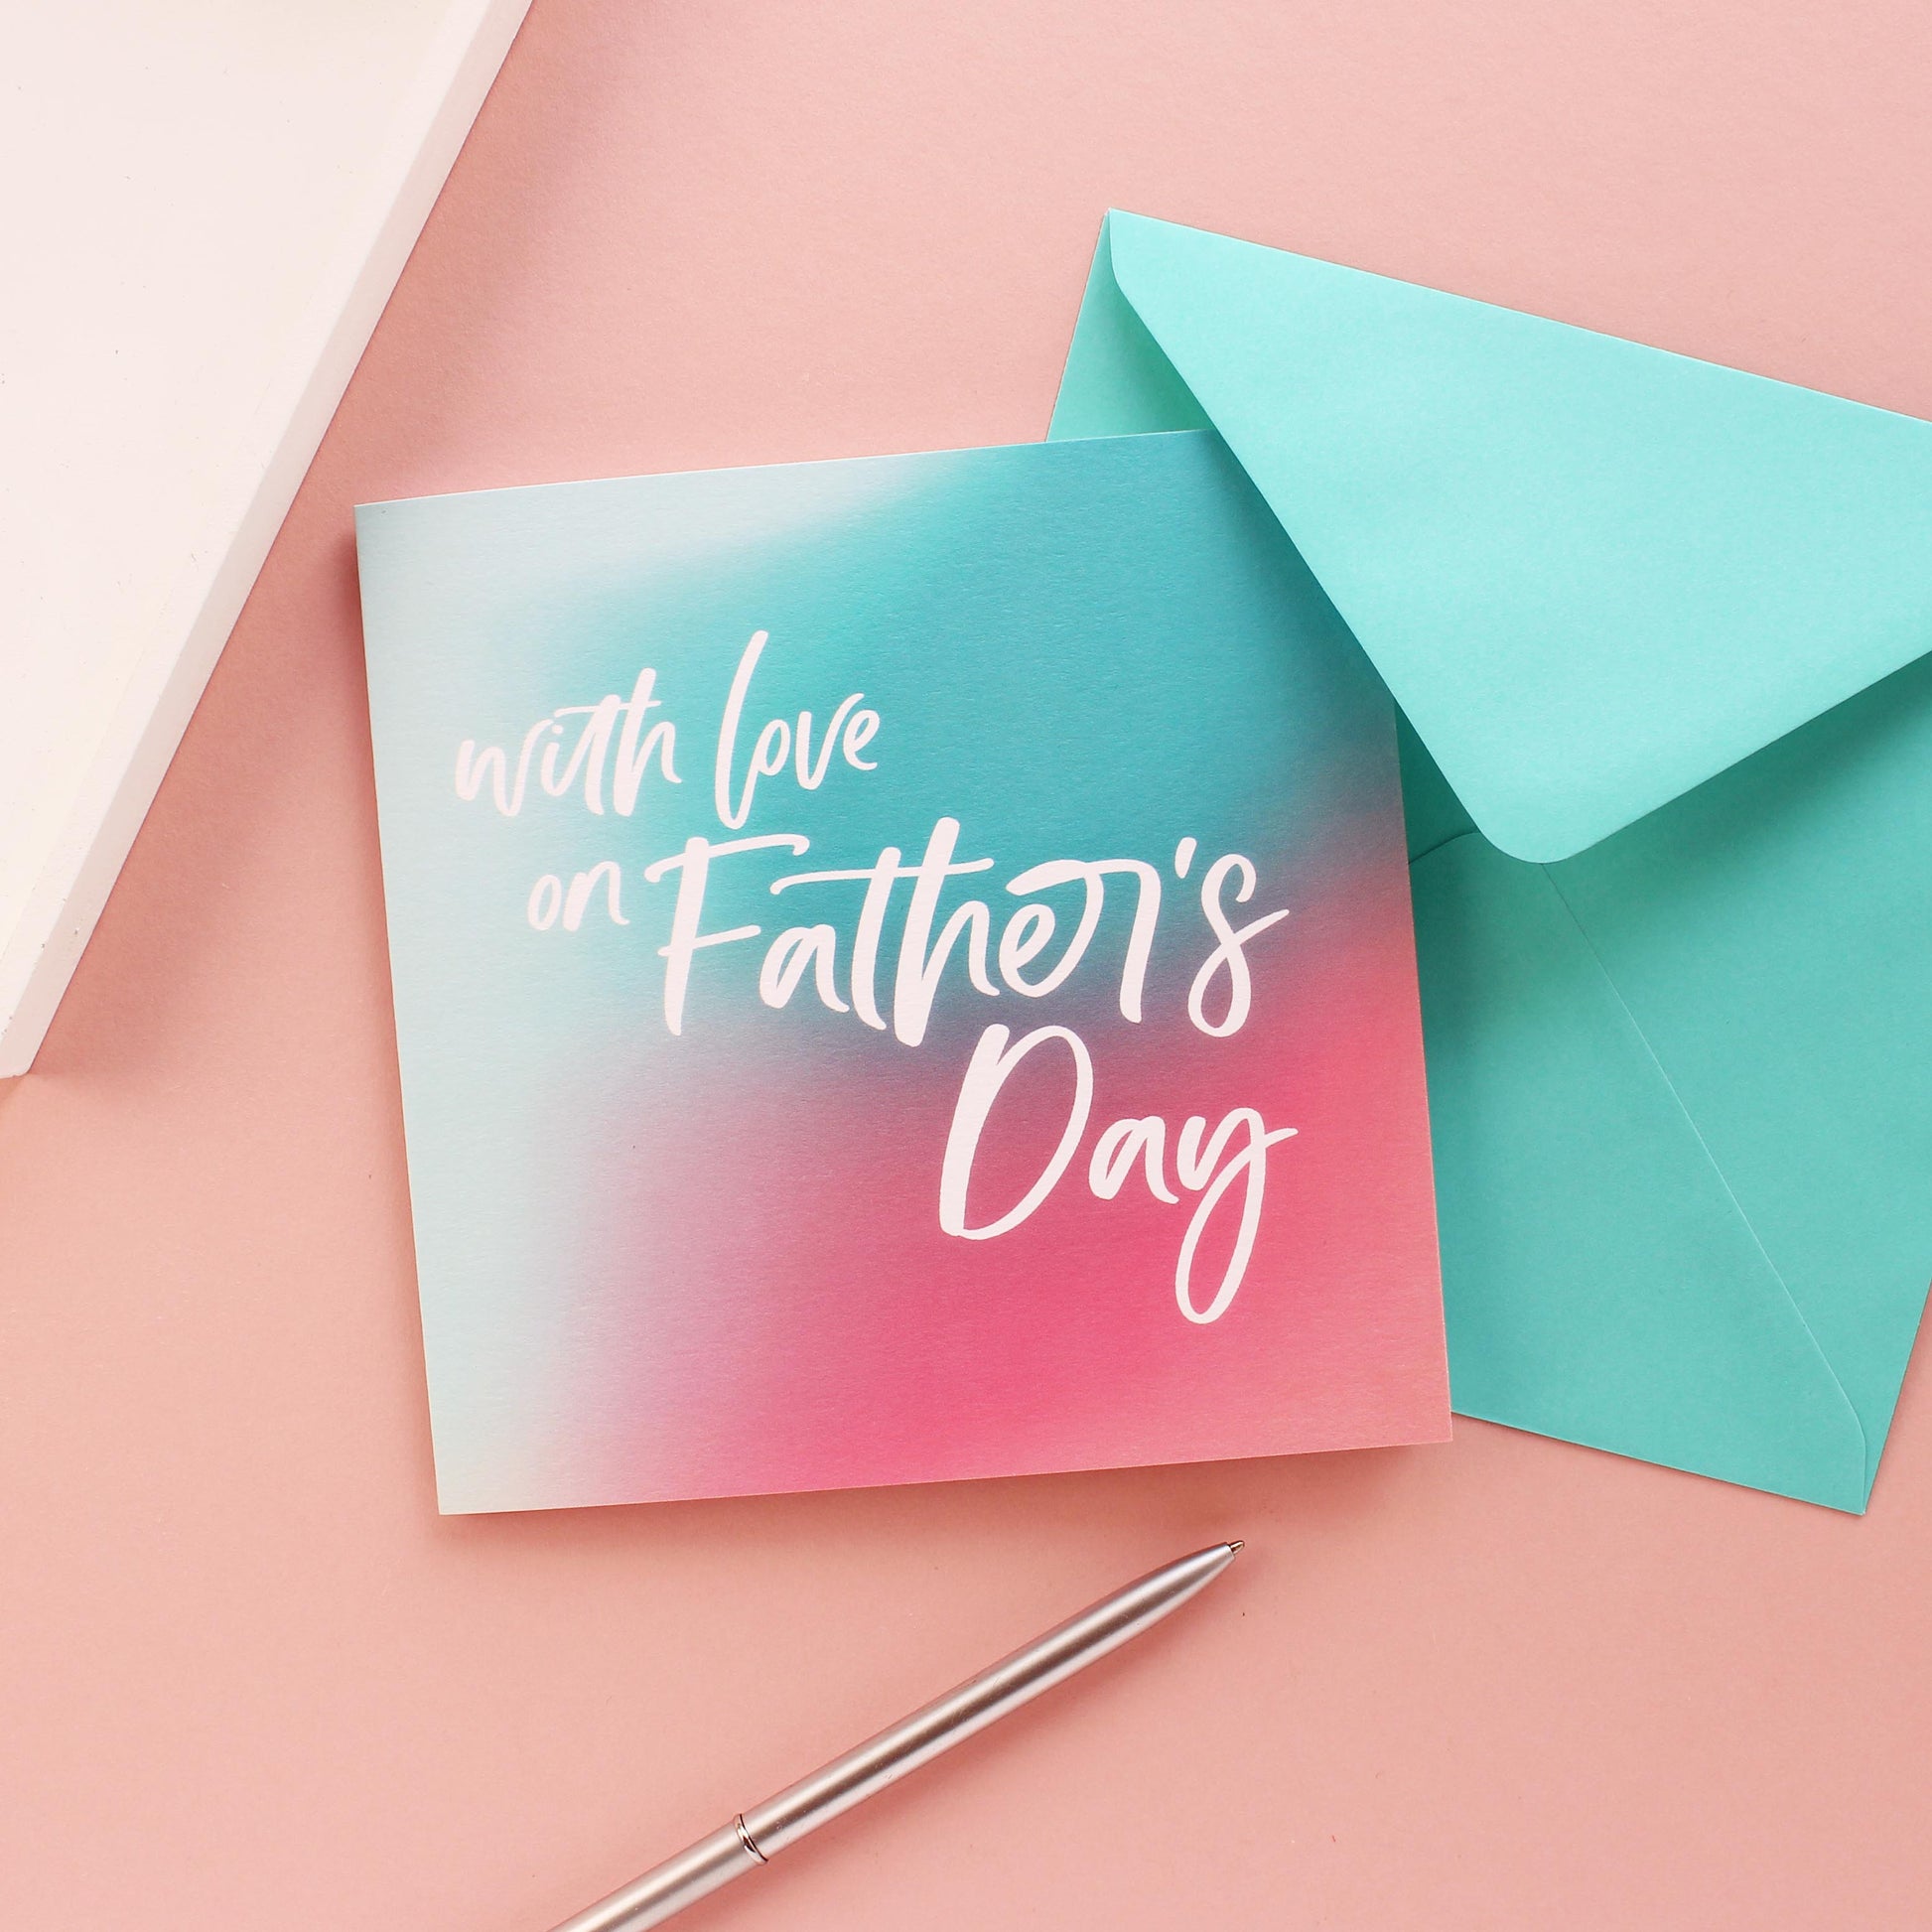 With love on Father's Day card from Purple Tree Designs